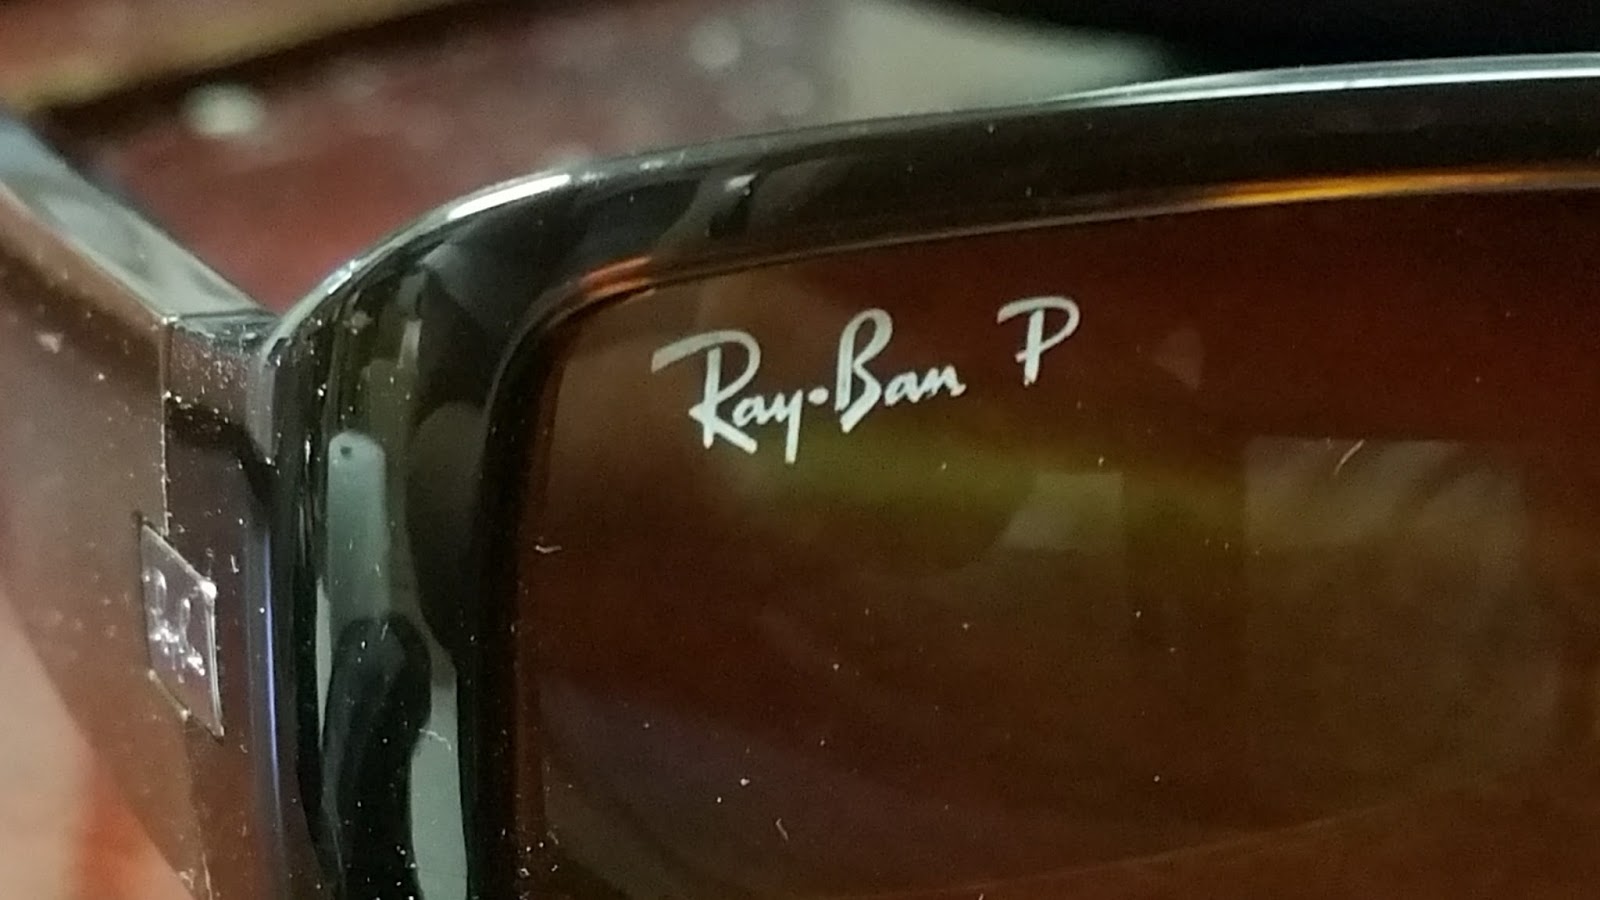 what does ray ban p stand for